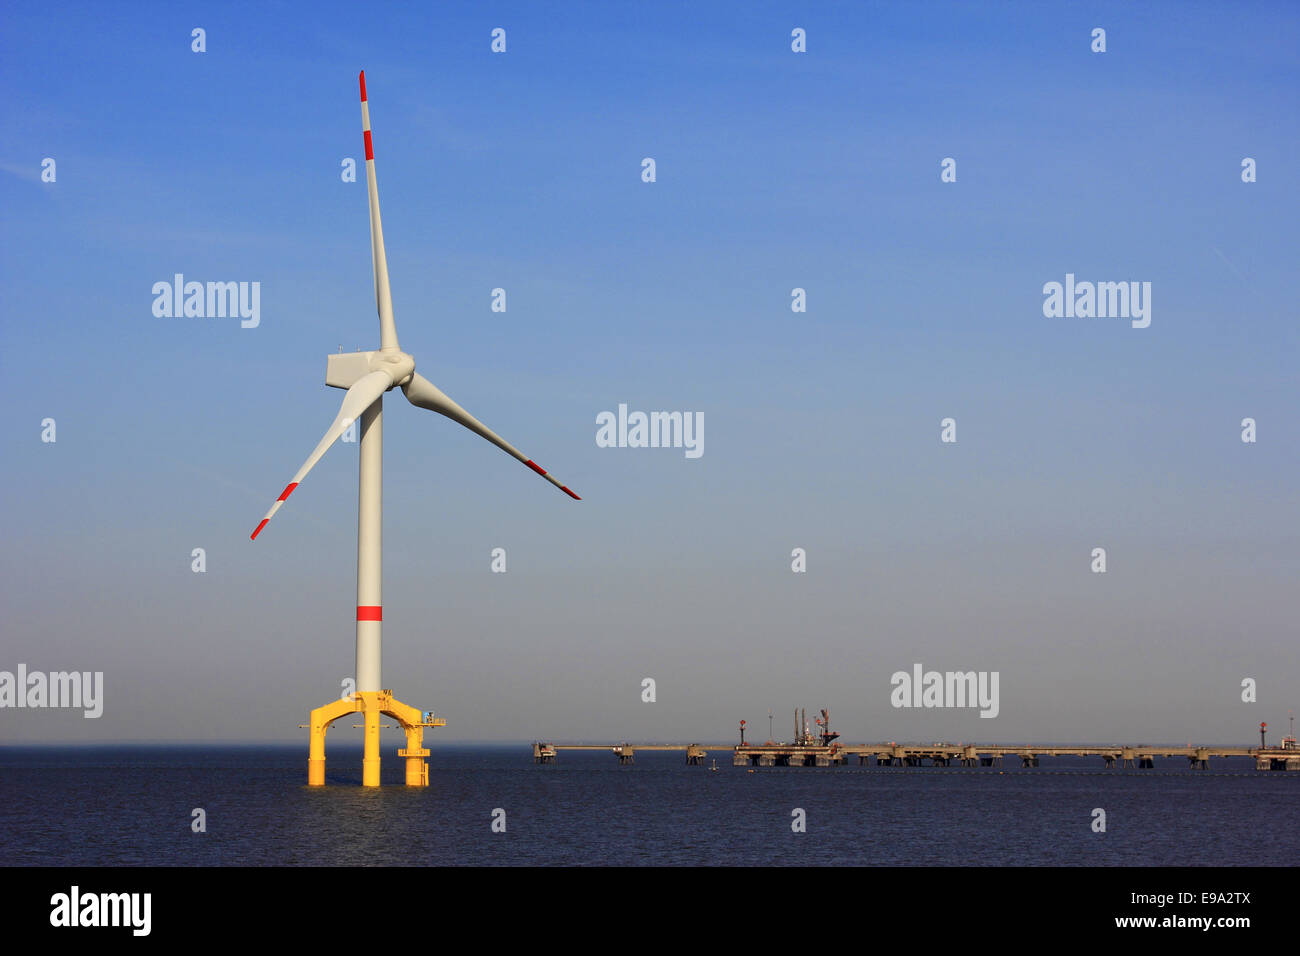 Offshore wind power plant Stock Photo